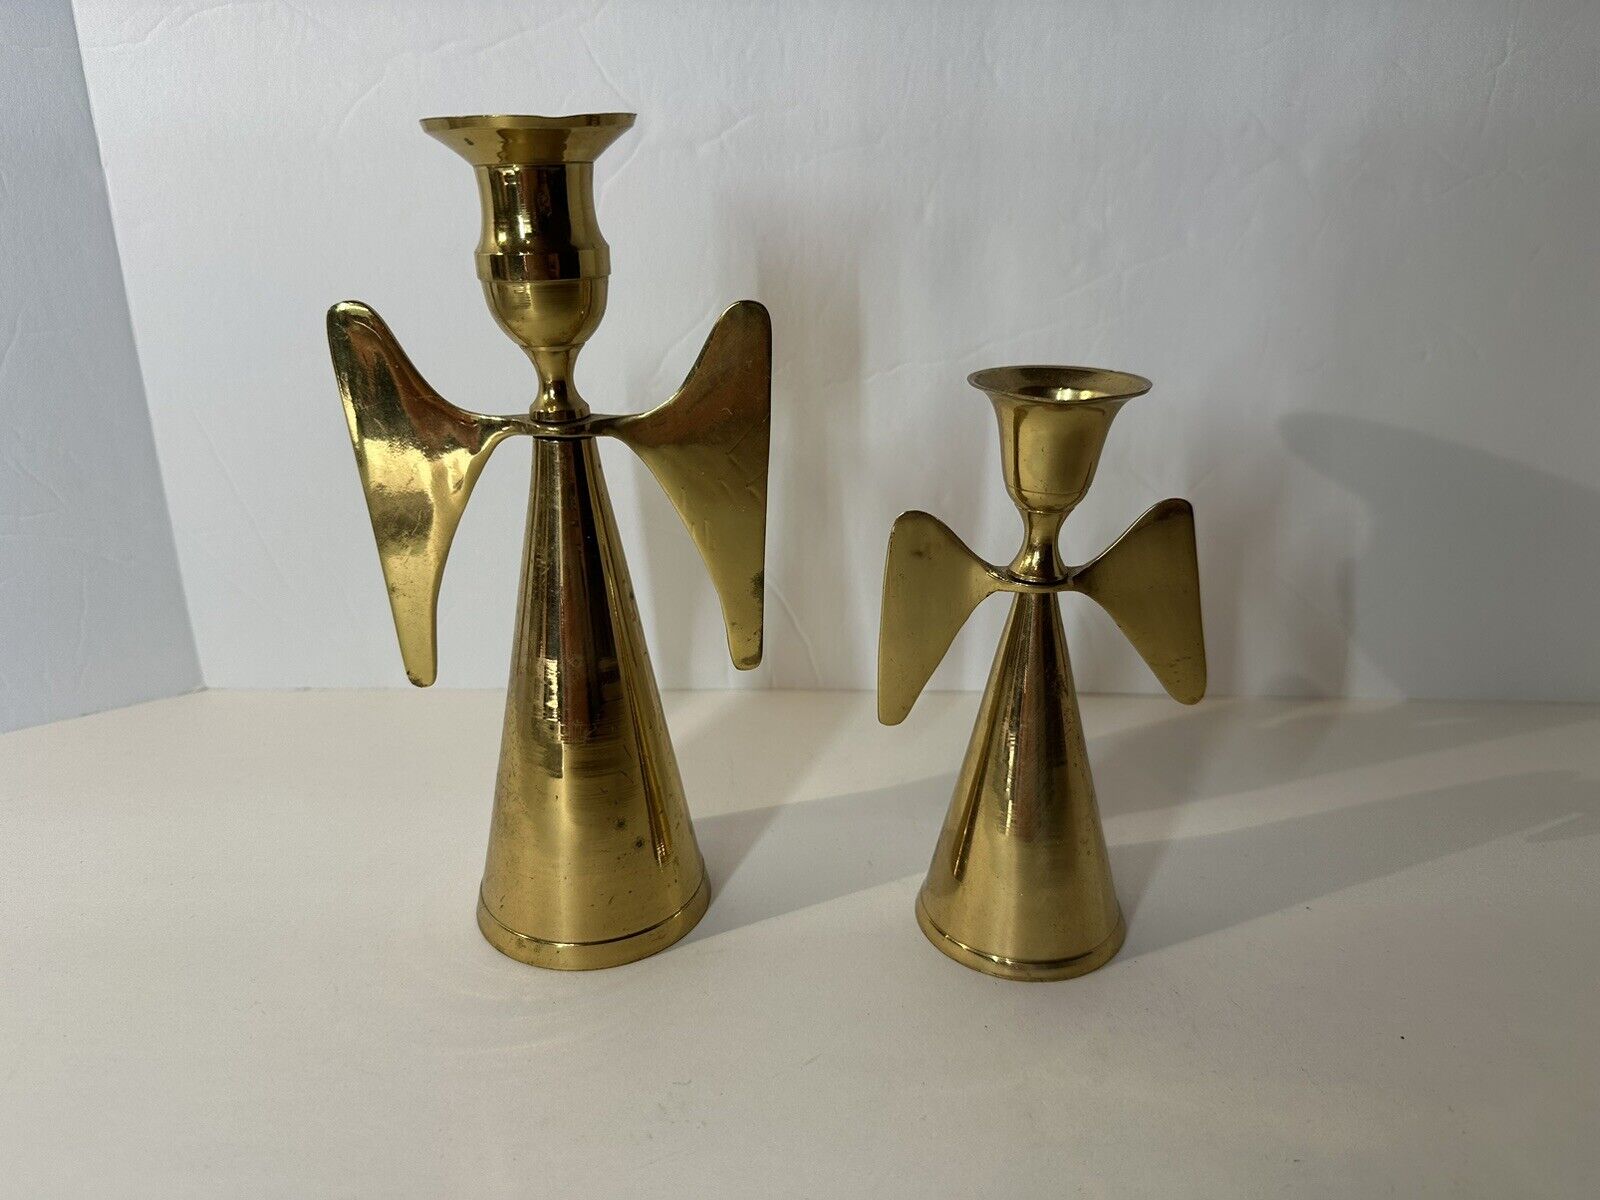 Vintage Solid Brass Angel Candlesticks Set of 2 Made in India Candle Holder 